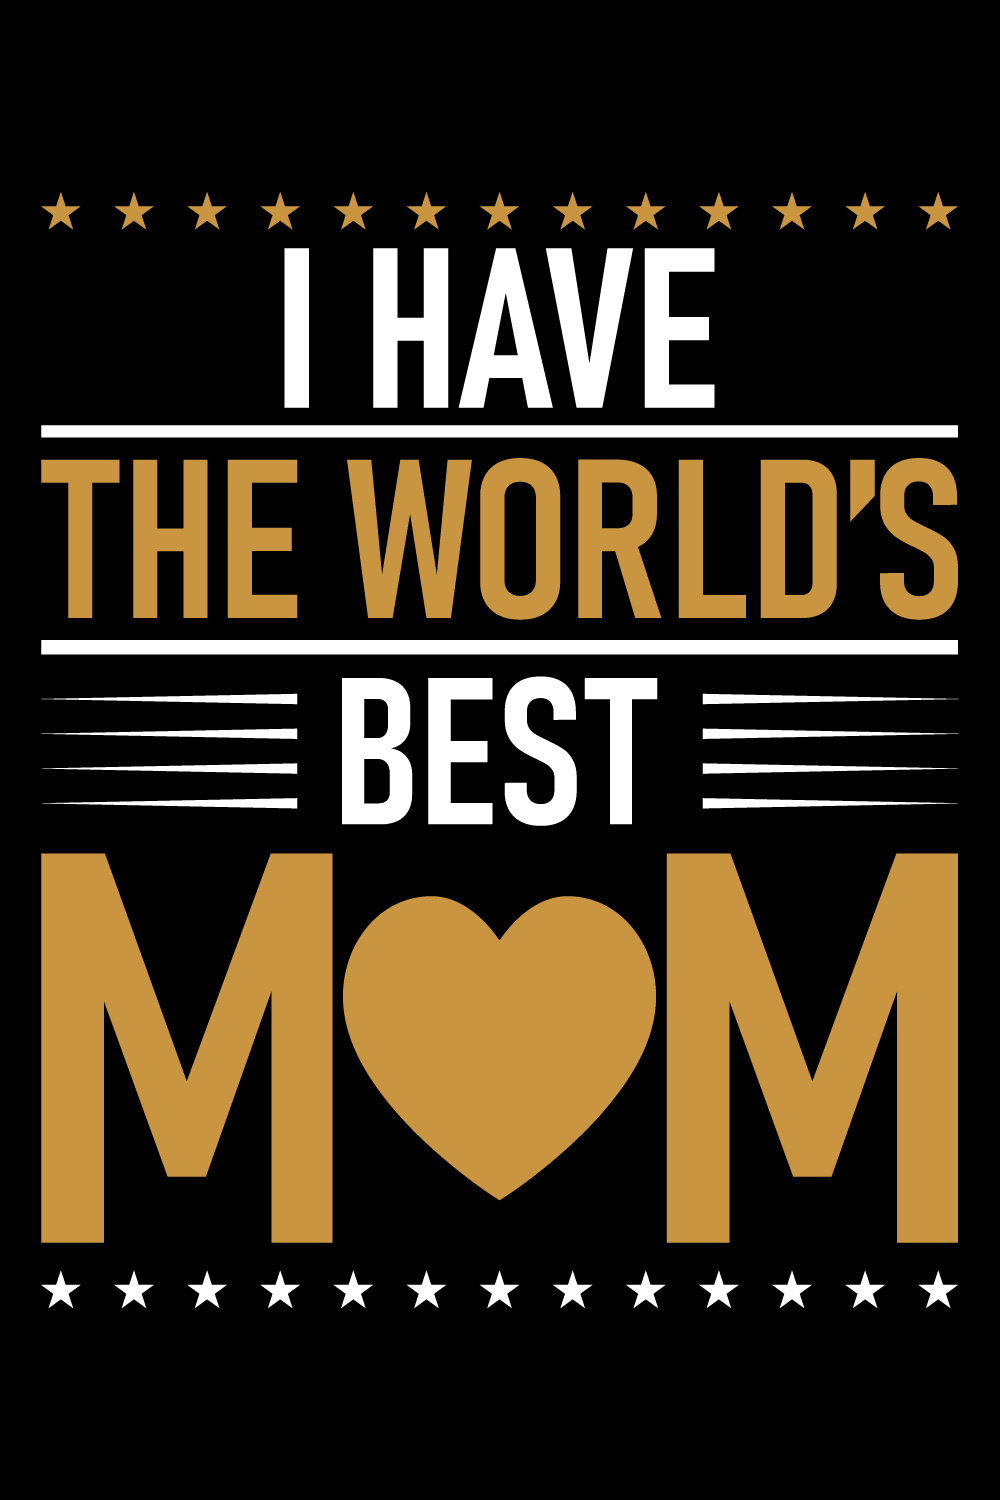 The world best mom t shirt pinterest preview image.